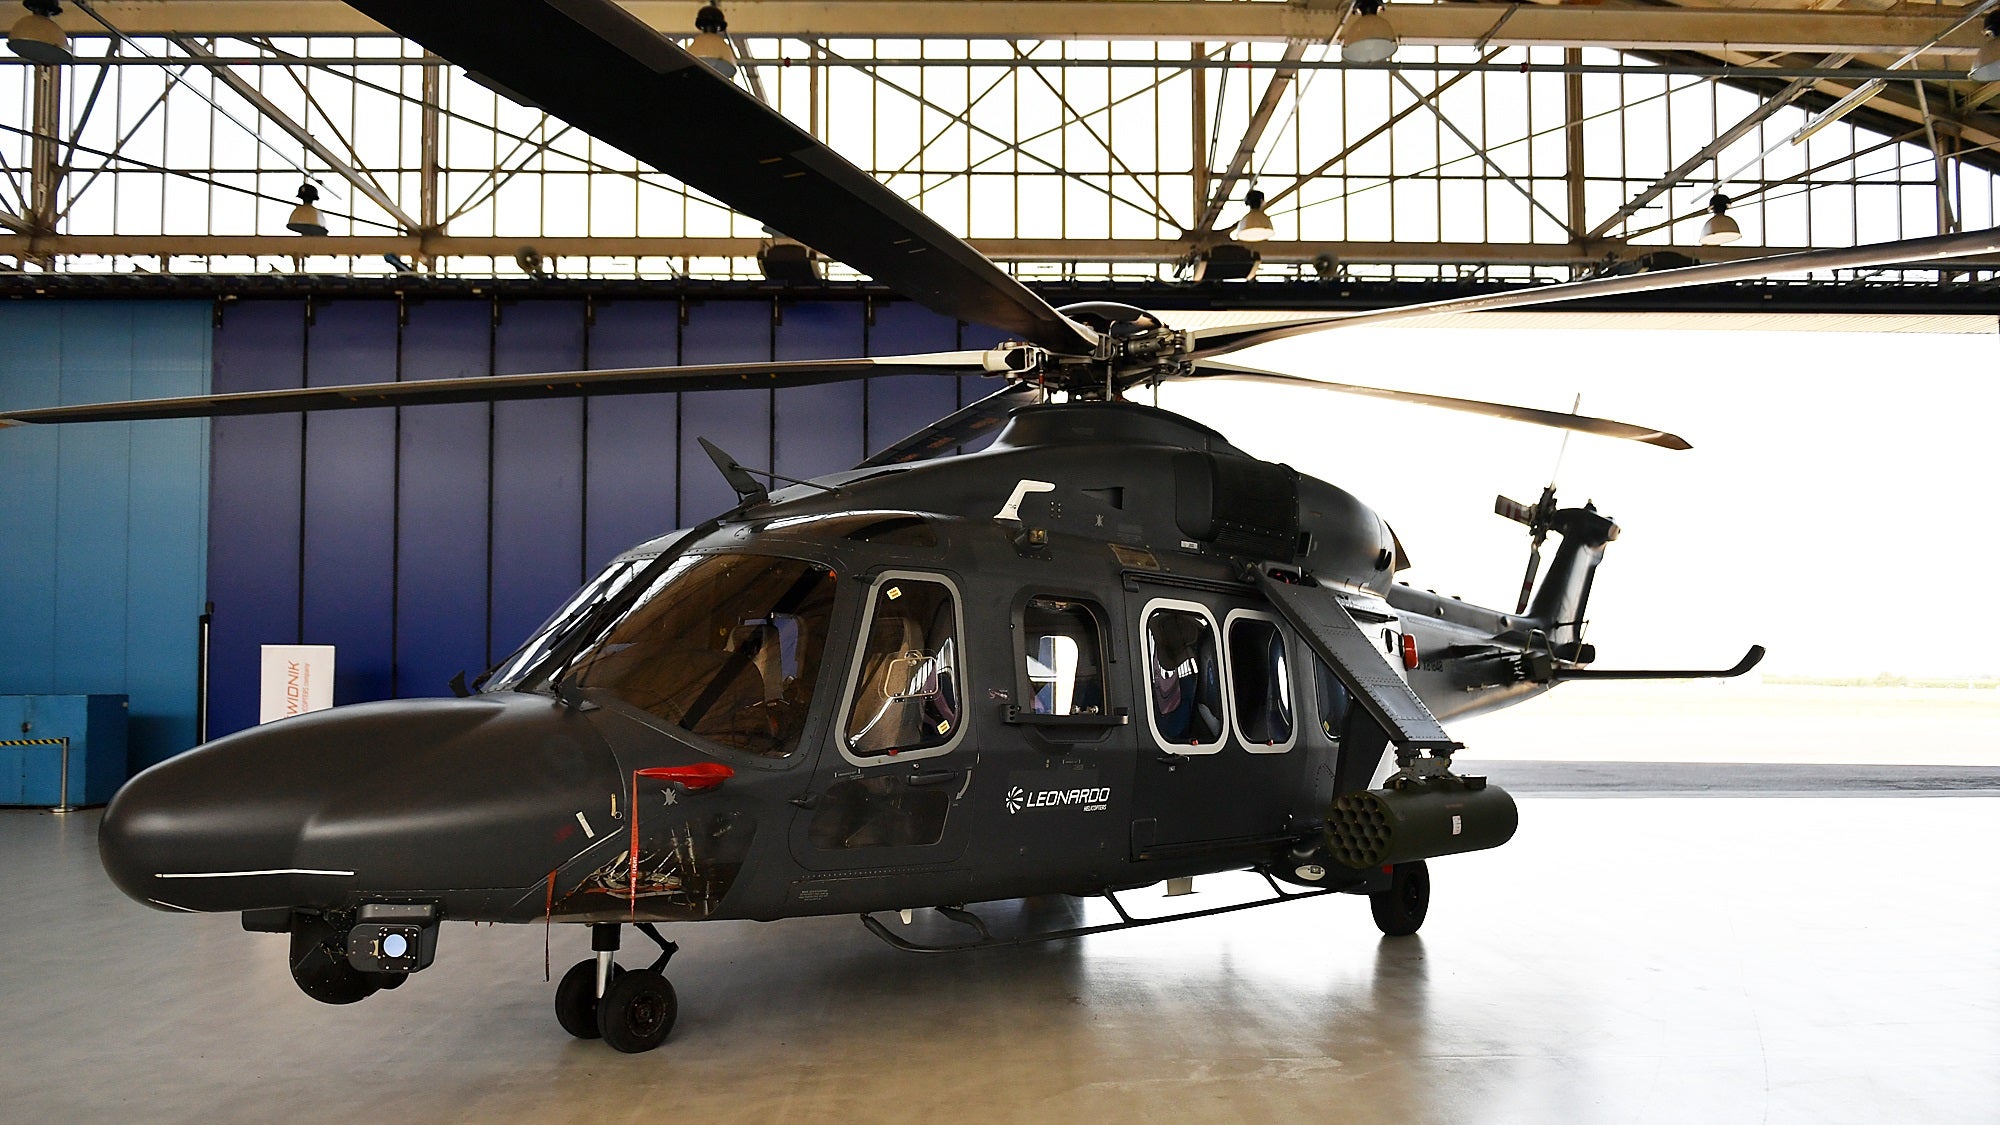 32-aw-149s-for-the-polish-armed-forces-is-a-done-deal-overt-defense